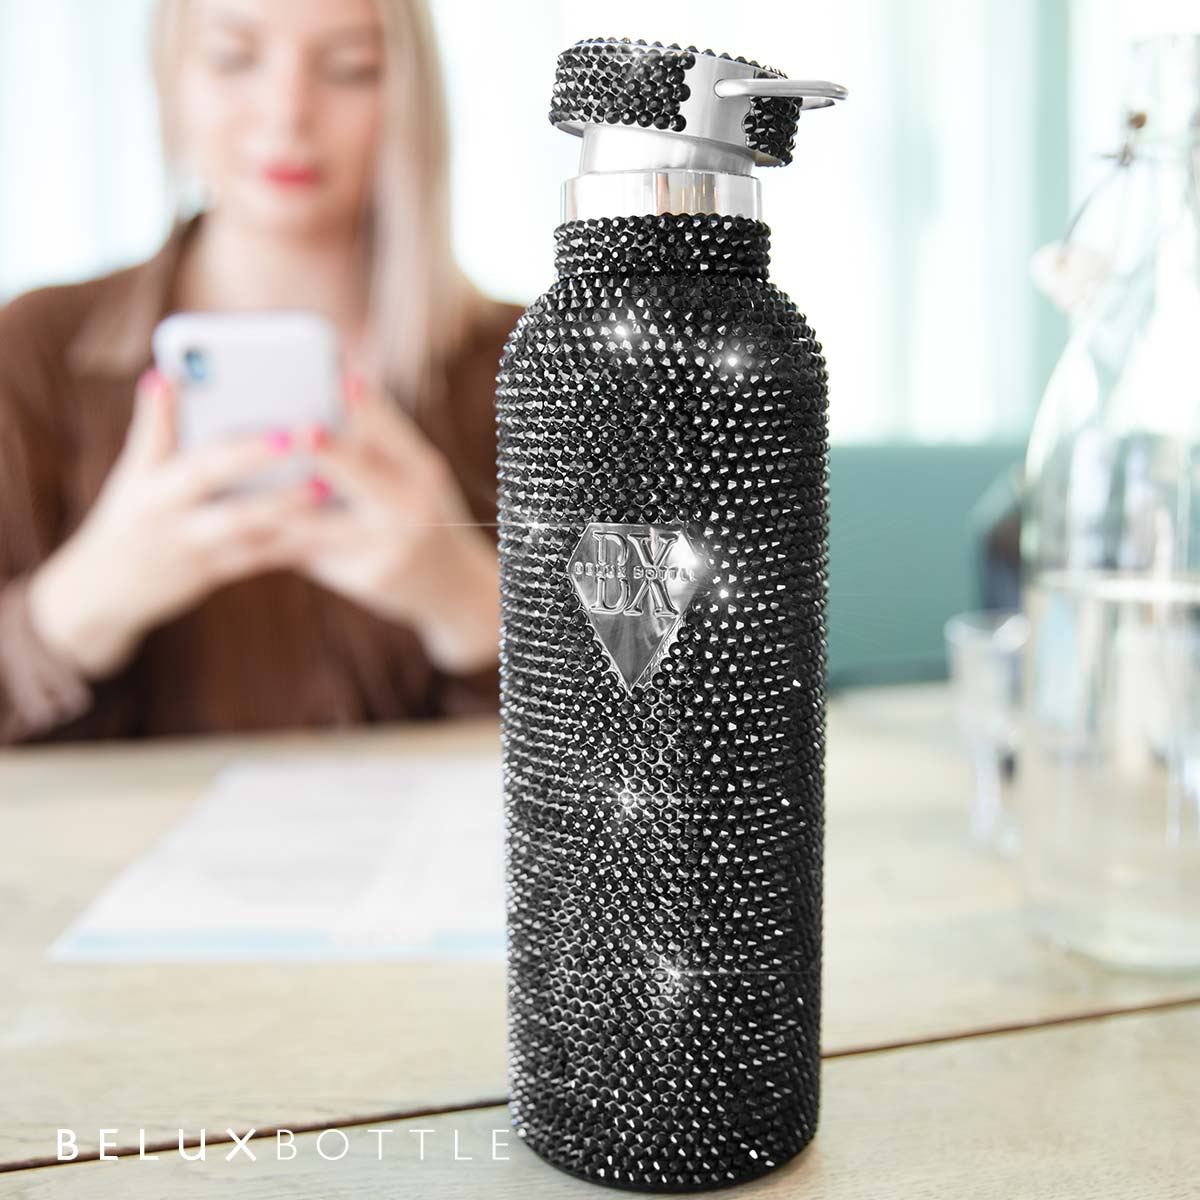 Stylish Belux Bottle Black Diamante Drink Bottle, with a woman engaged on her mobile in the background